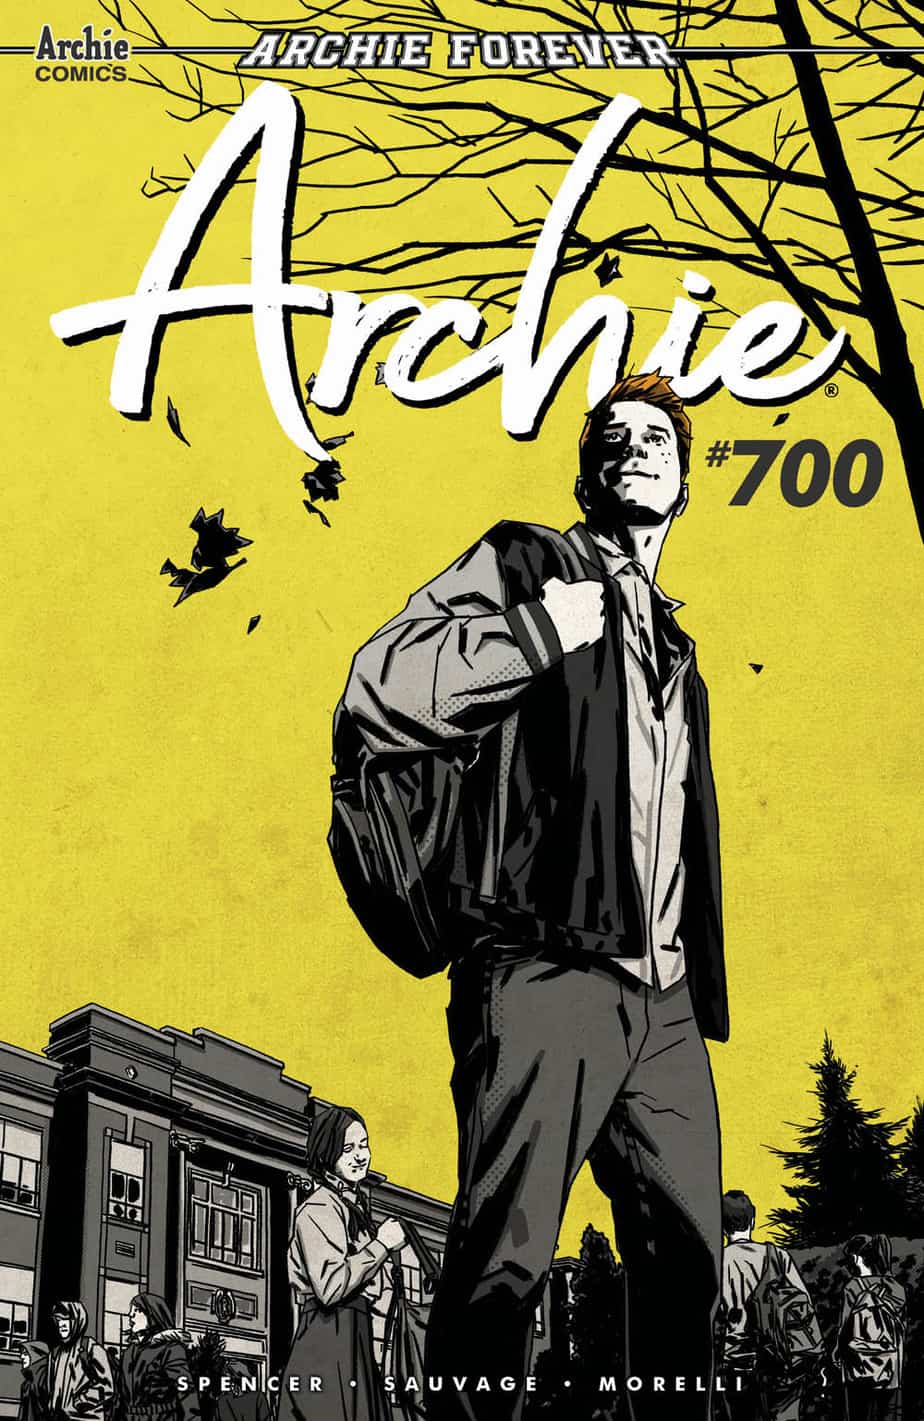 Archie #700 - Variant Cover by Matthew Dow Smith